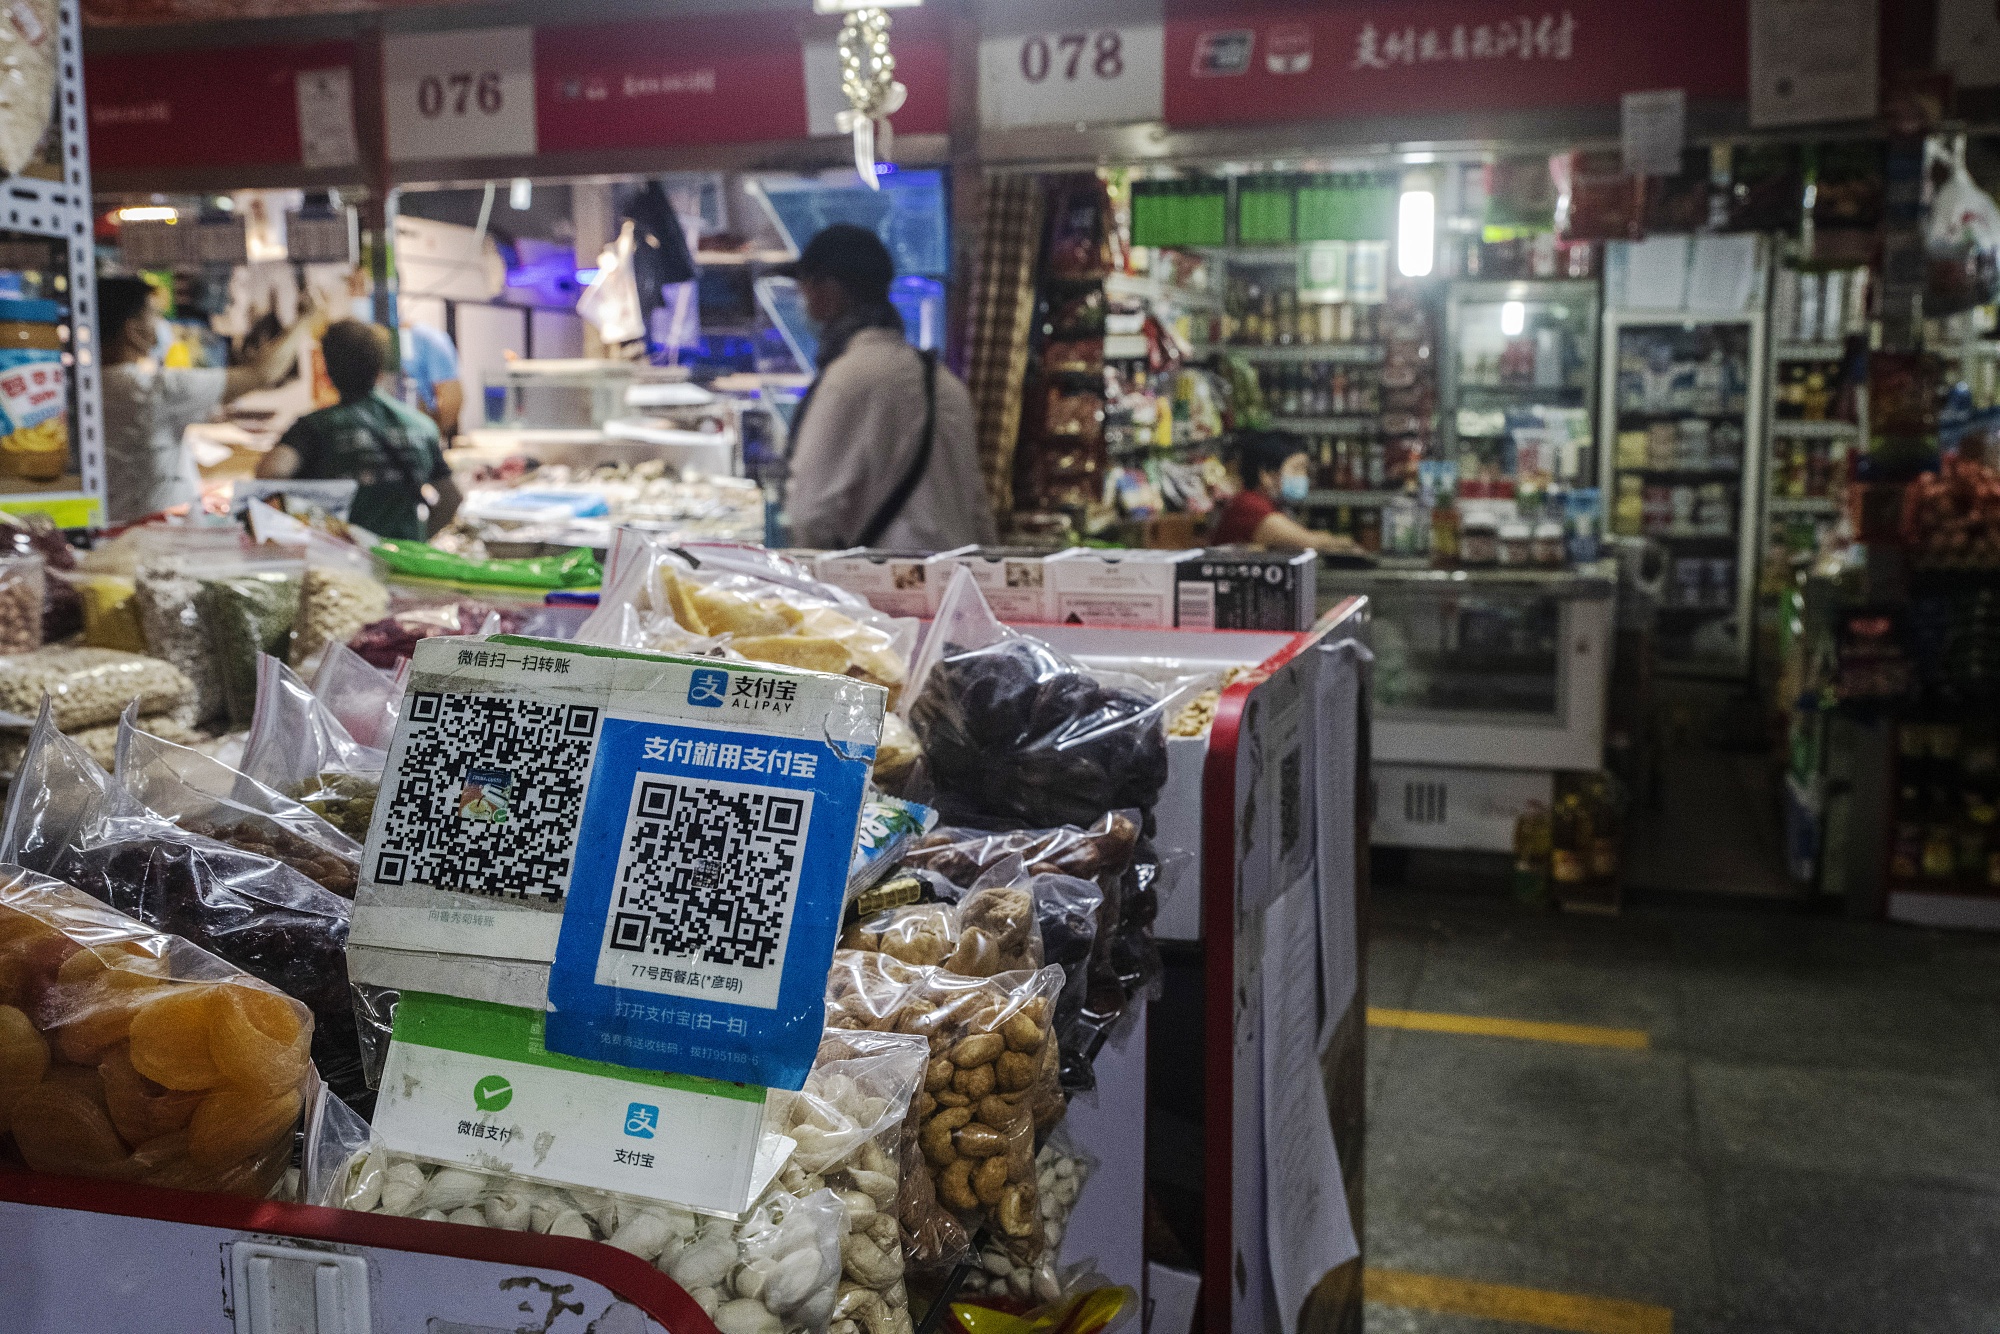 Ant’s Alipay service revolutionized the way Chinese people pay for things, both online and in physical shops.&nbsp;